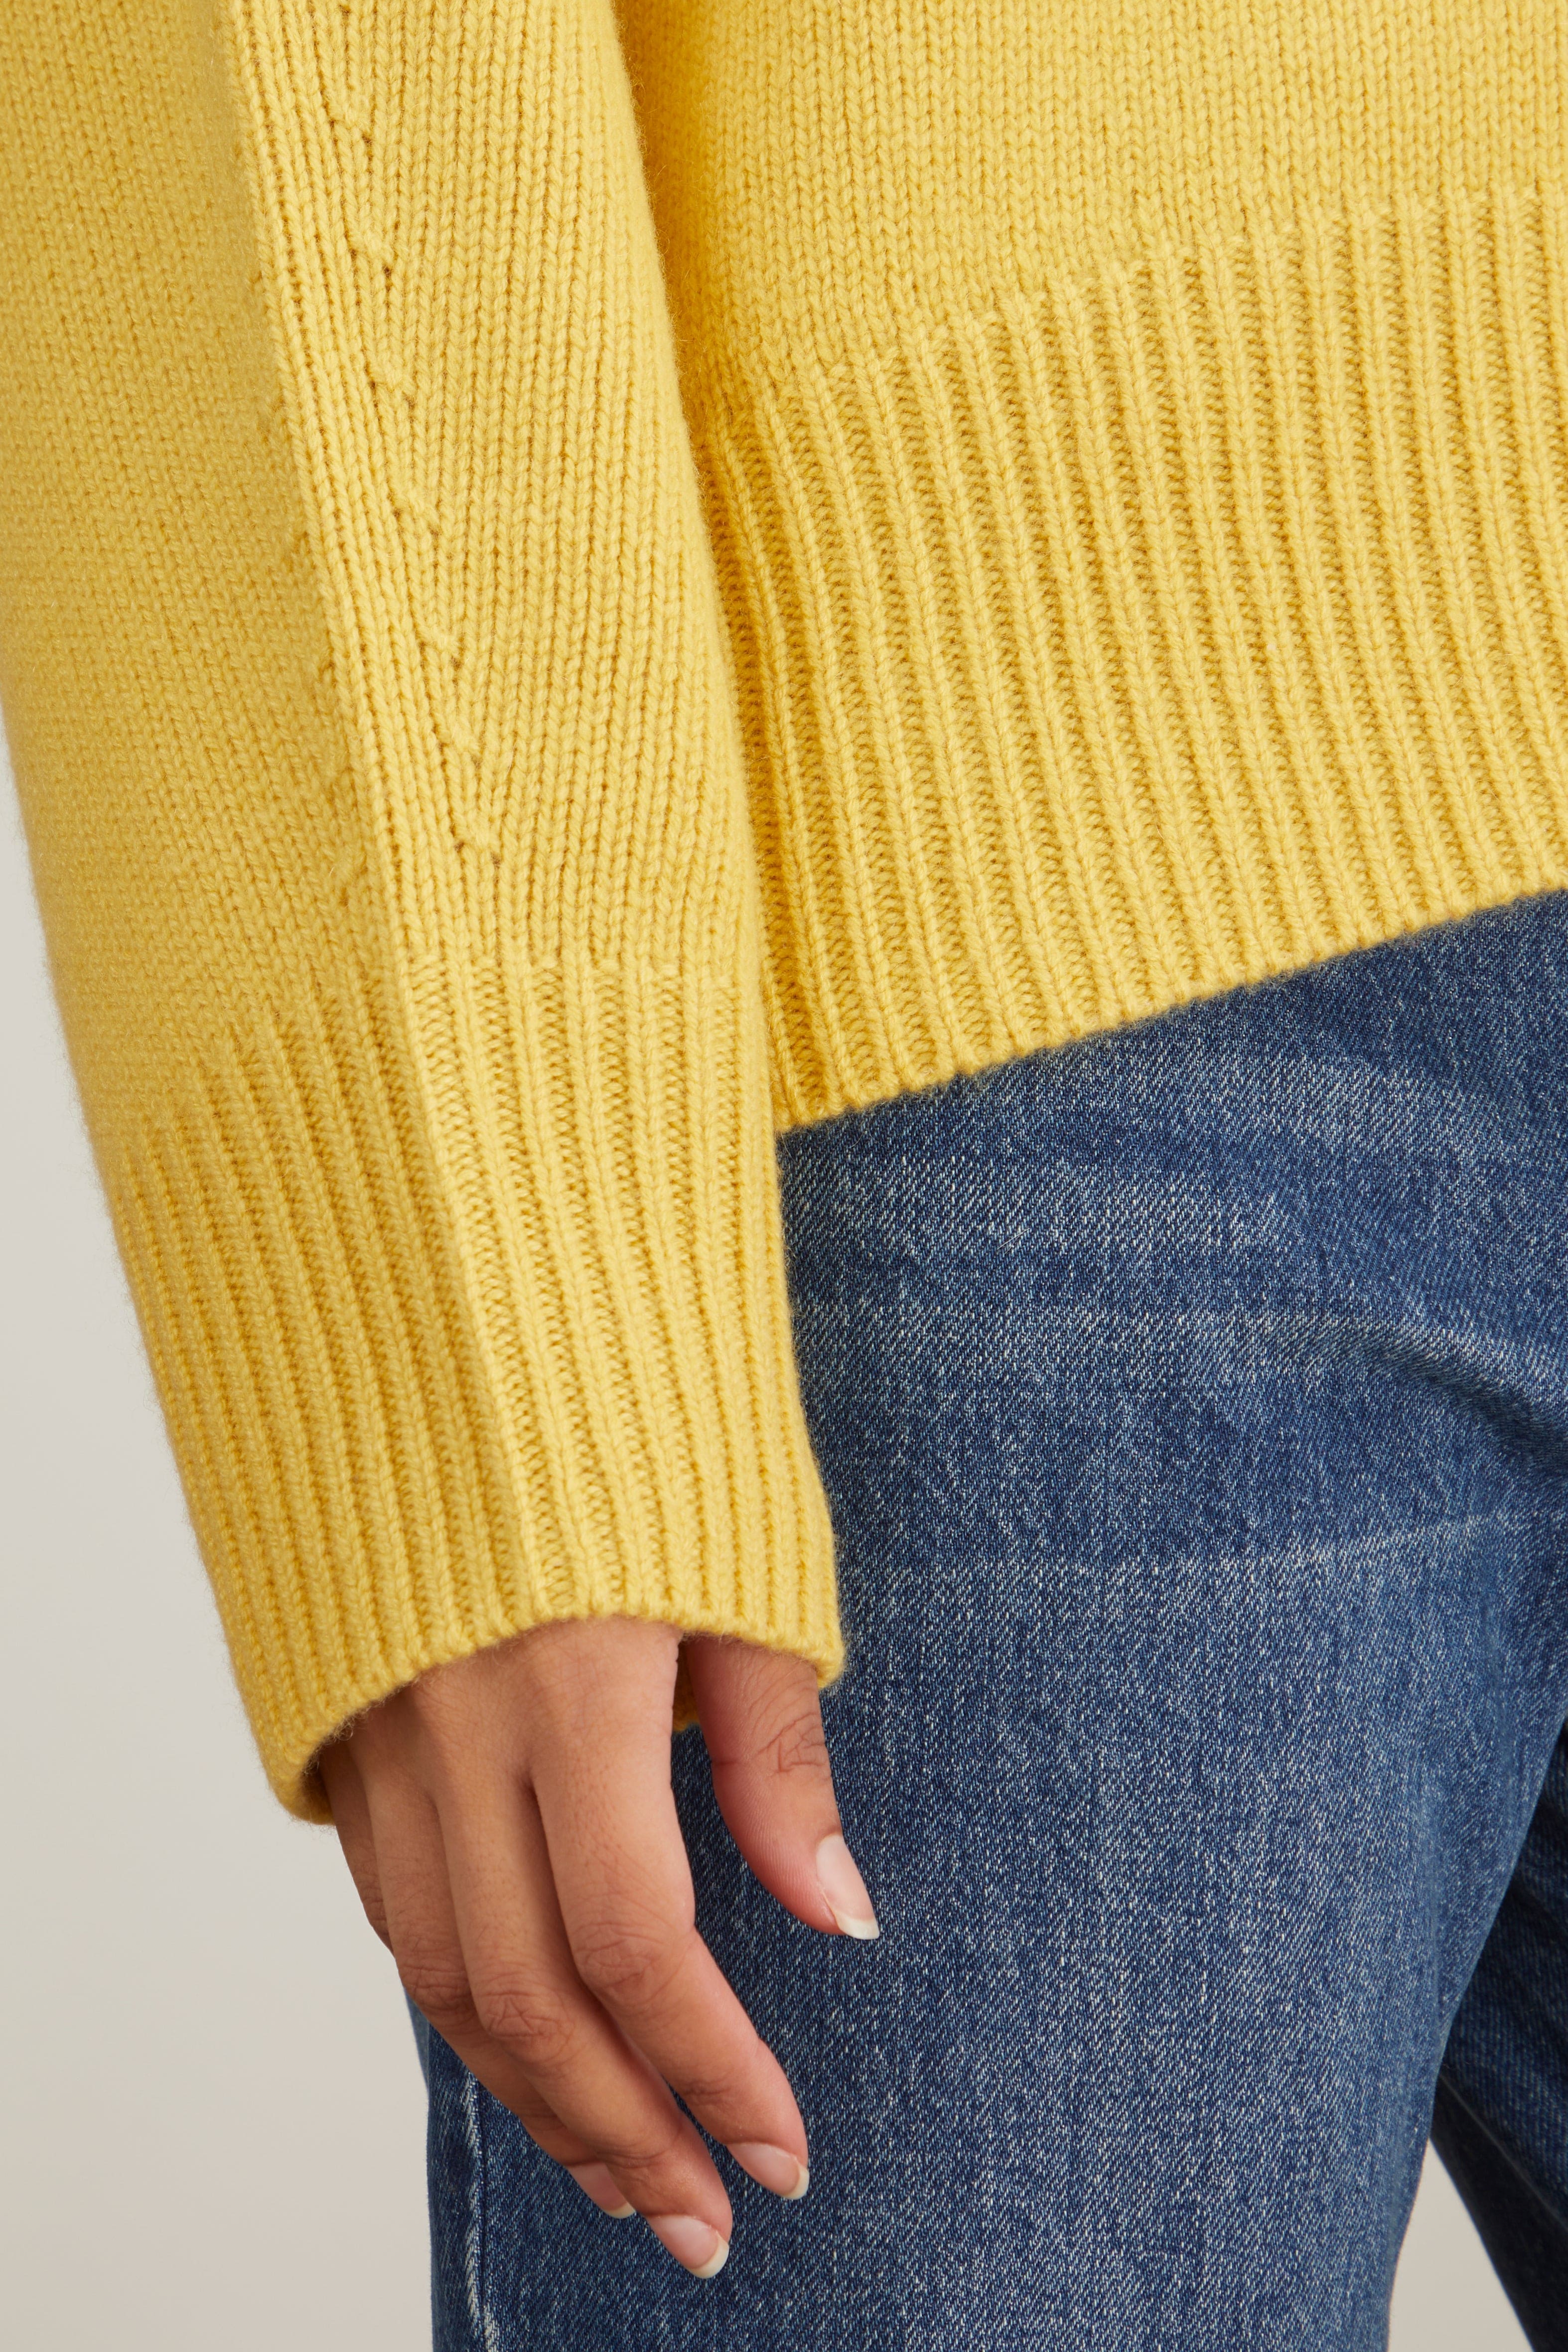 Arch 4 Sweaters Battersea Sweater in Canary Yellow Arch4 Battersea Sweater in Canary Yellow